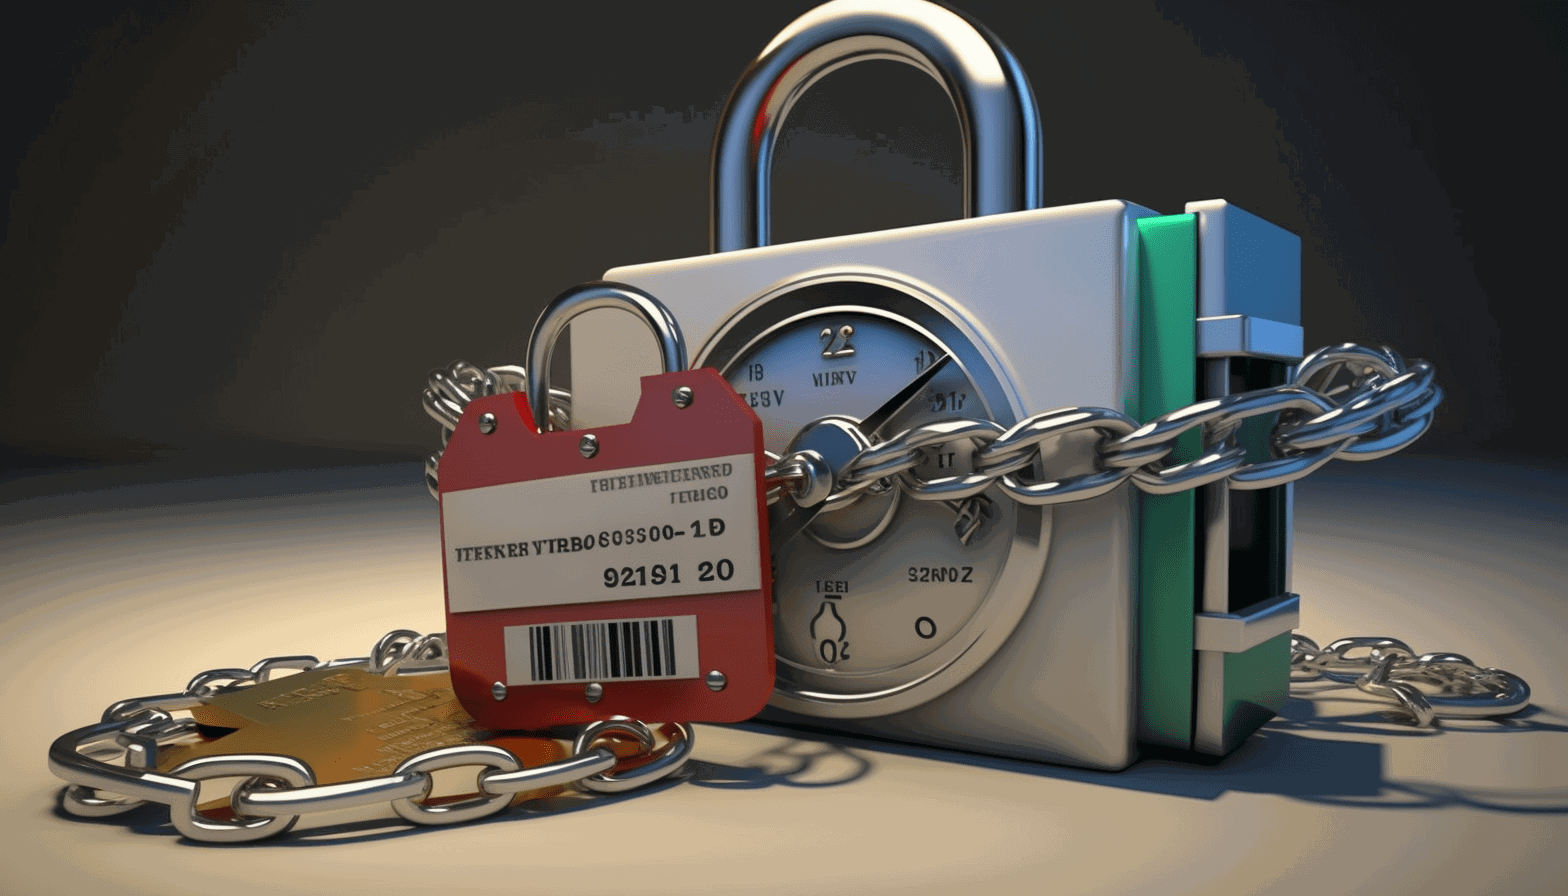 A lock with a chain wrapped around a credit score report, symbolizing the protection and security that freezing your credit provides against identity theft and fraud